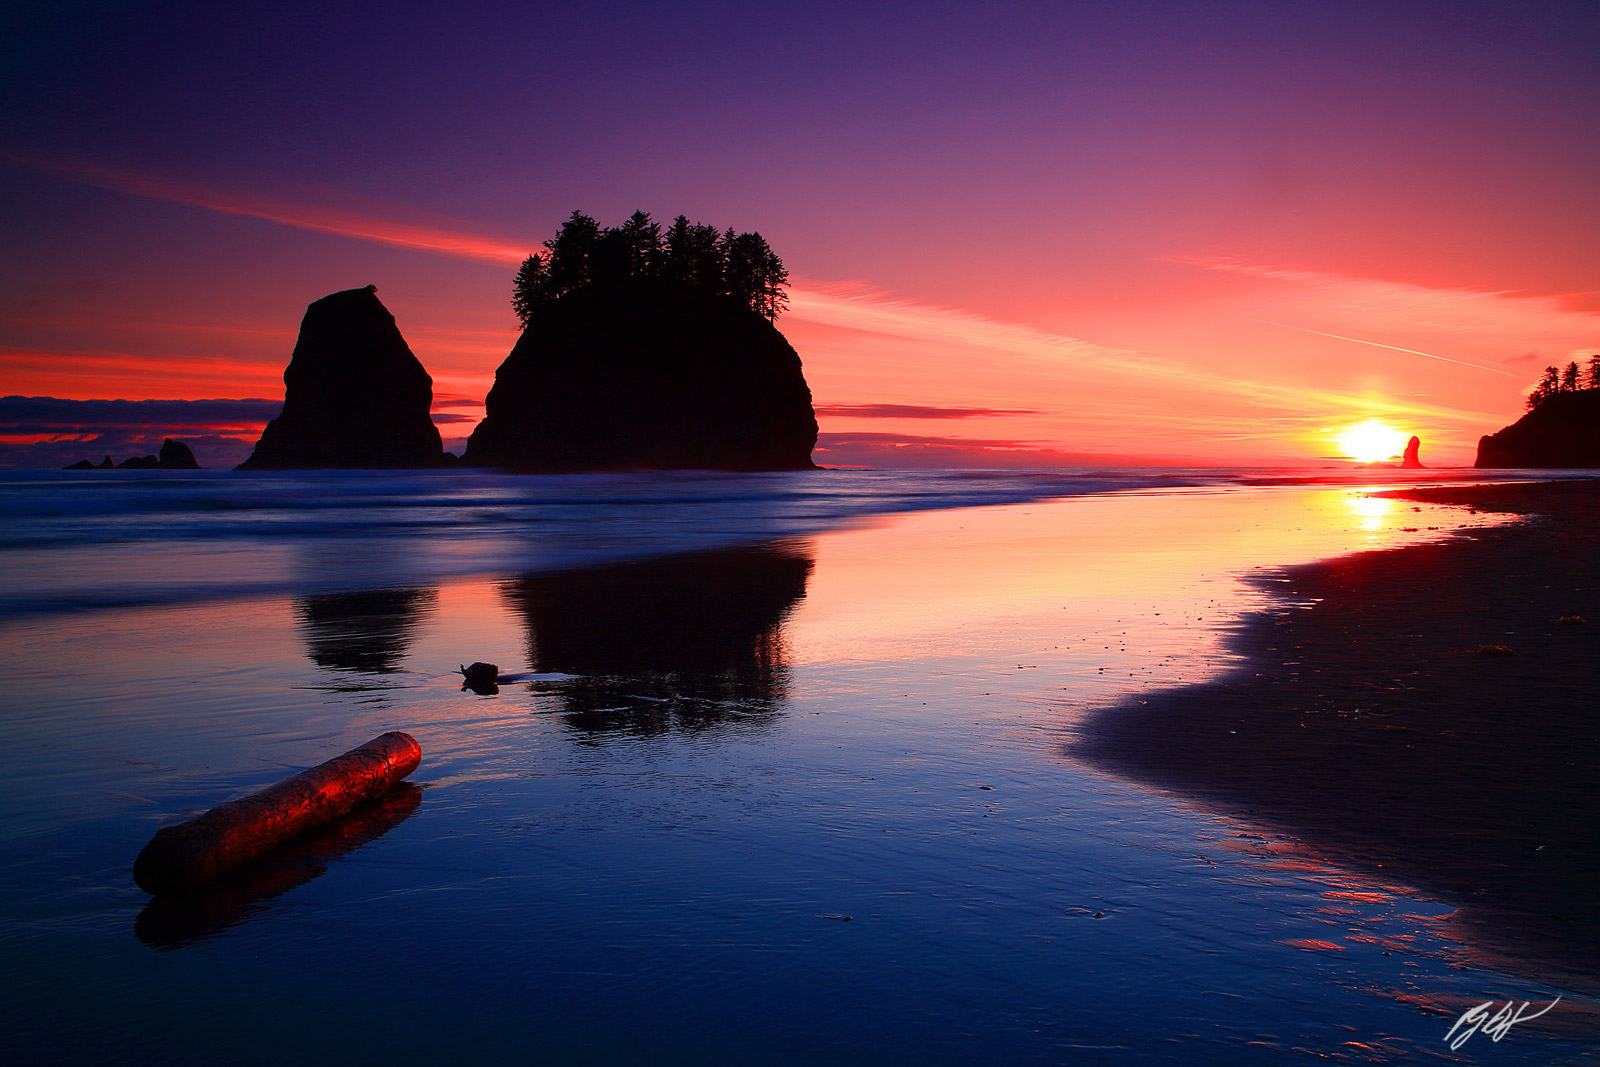 Sunset and Sea Stacks from Second Beach in Olympic National Park in Washington